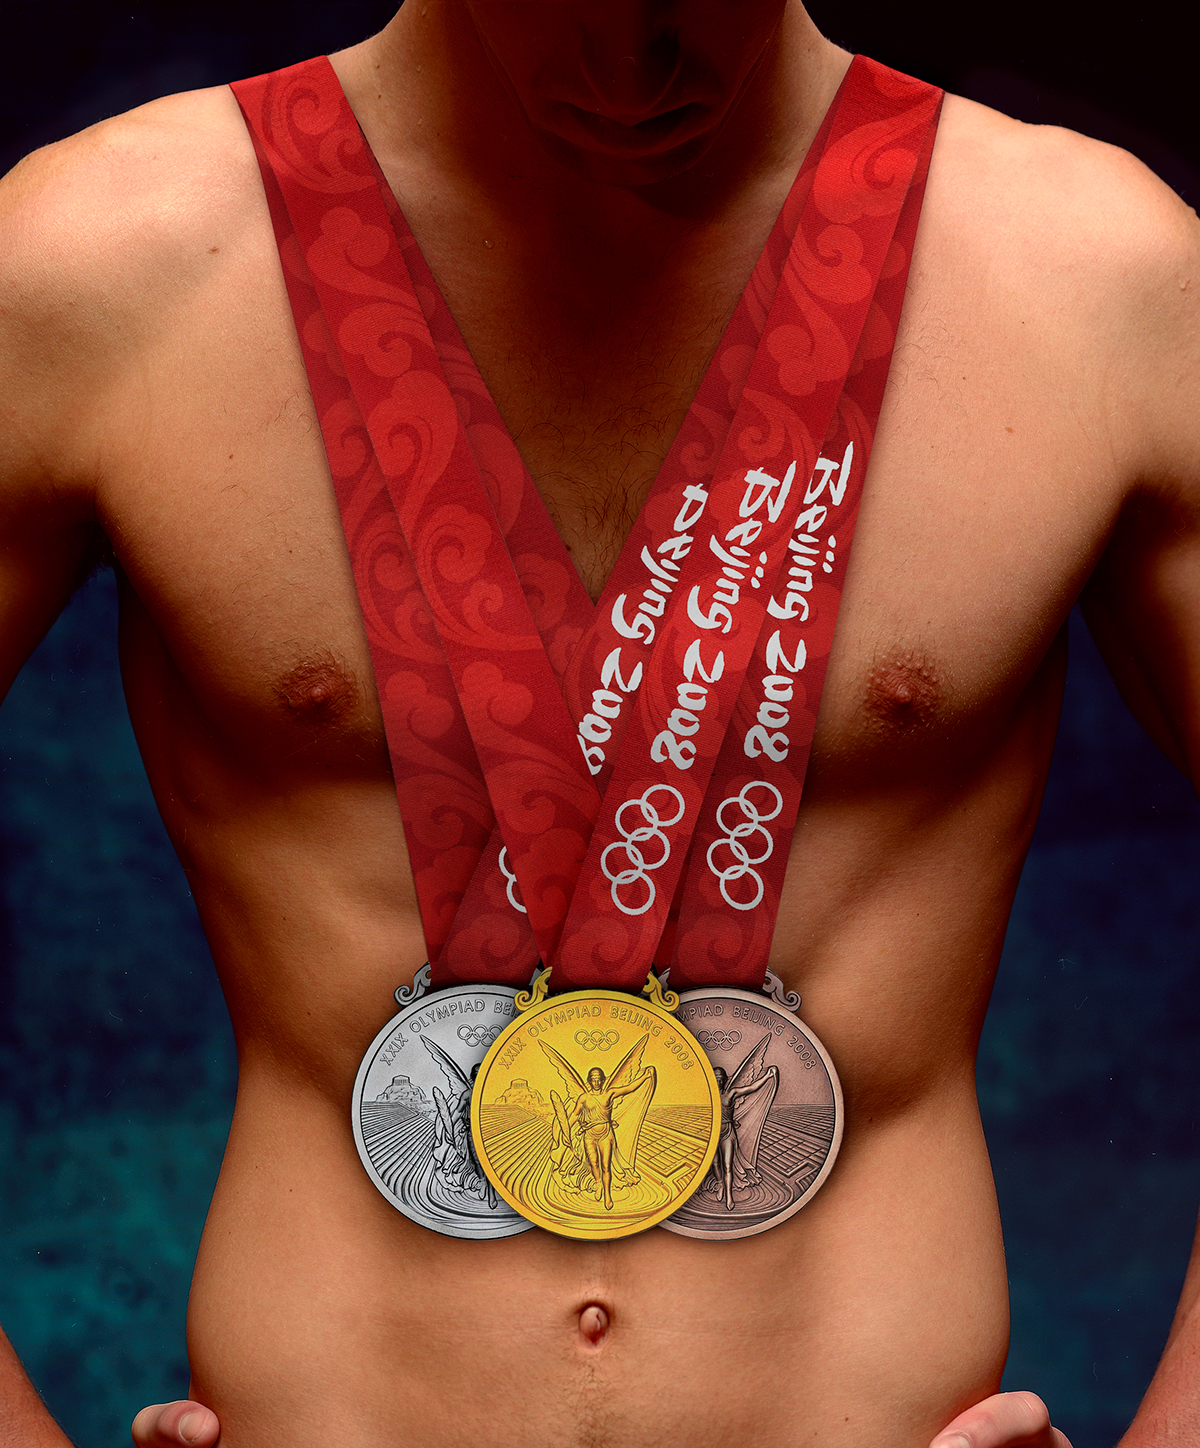 Michael Phelps composition medals swimming